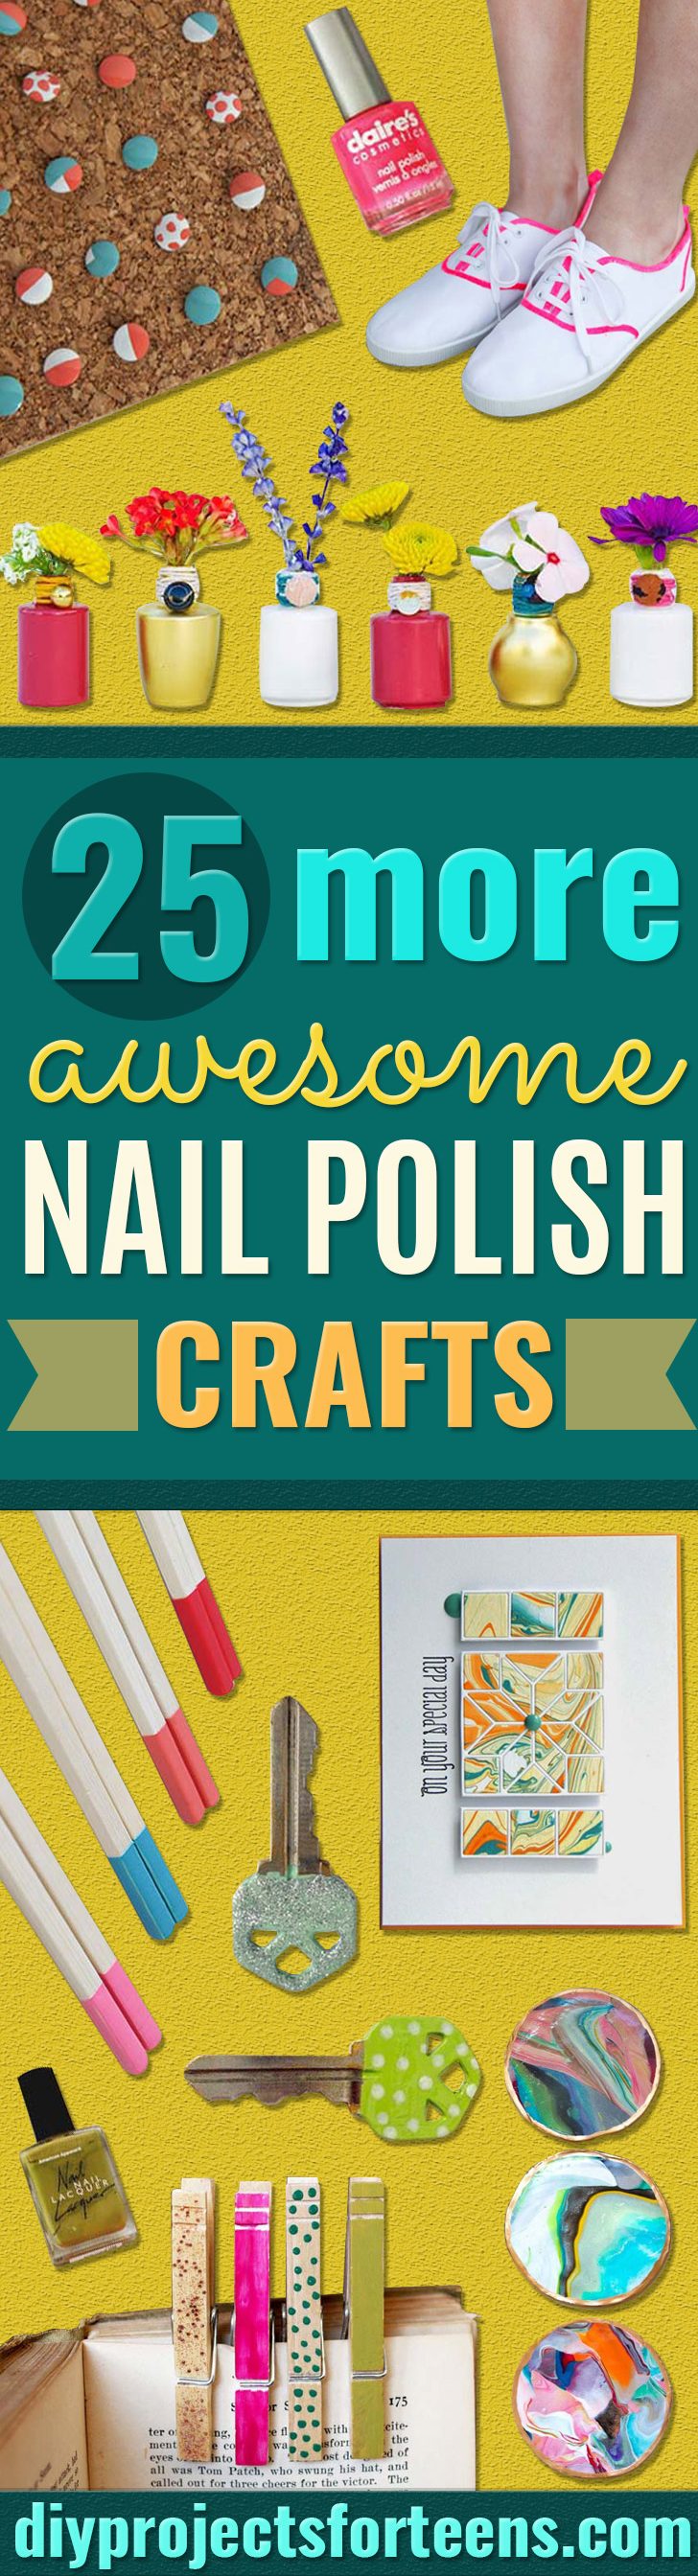 DIY Crafts Using Nail Polish - Fun, Cool, Easy and Cheap Craft Ideas for Girls, Teens, Tweens and Adults | Wire Flowers, Glue Gun Craft Projects and Jewelry Made From nailpolish - Water Marble Tutorials and How To With Step by Step Instructions 